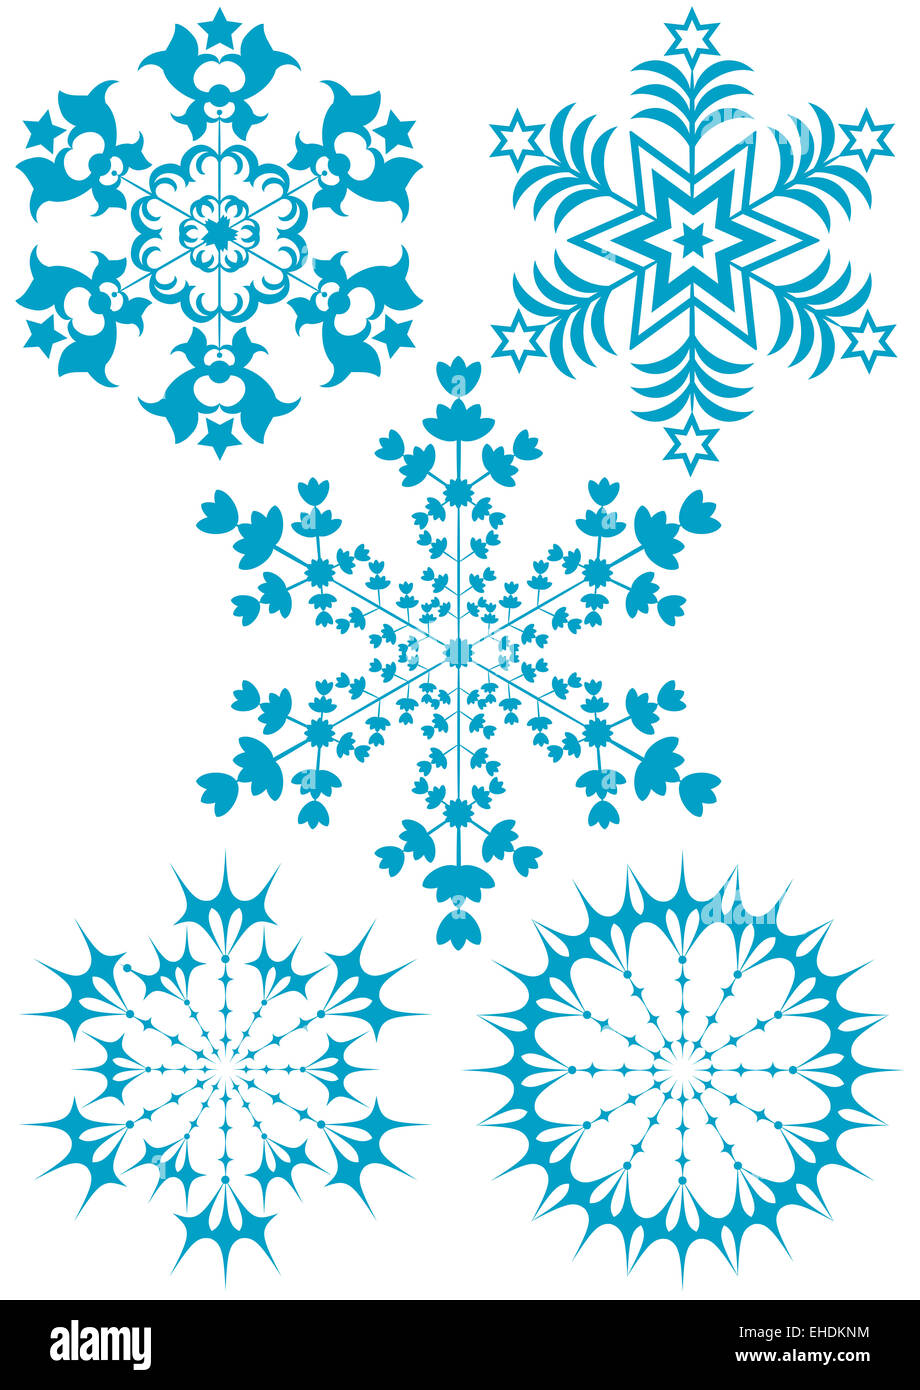 Collection blue snowflakes Stock Photo